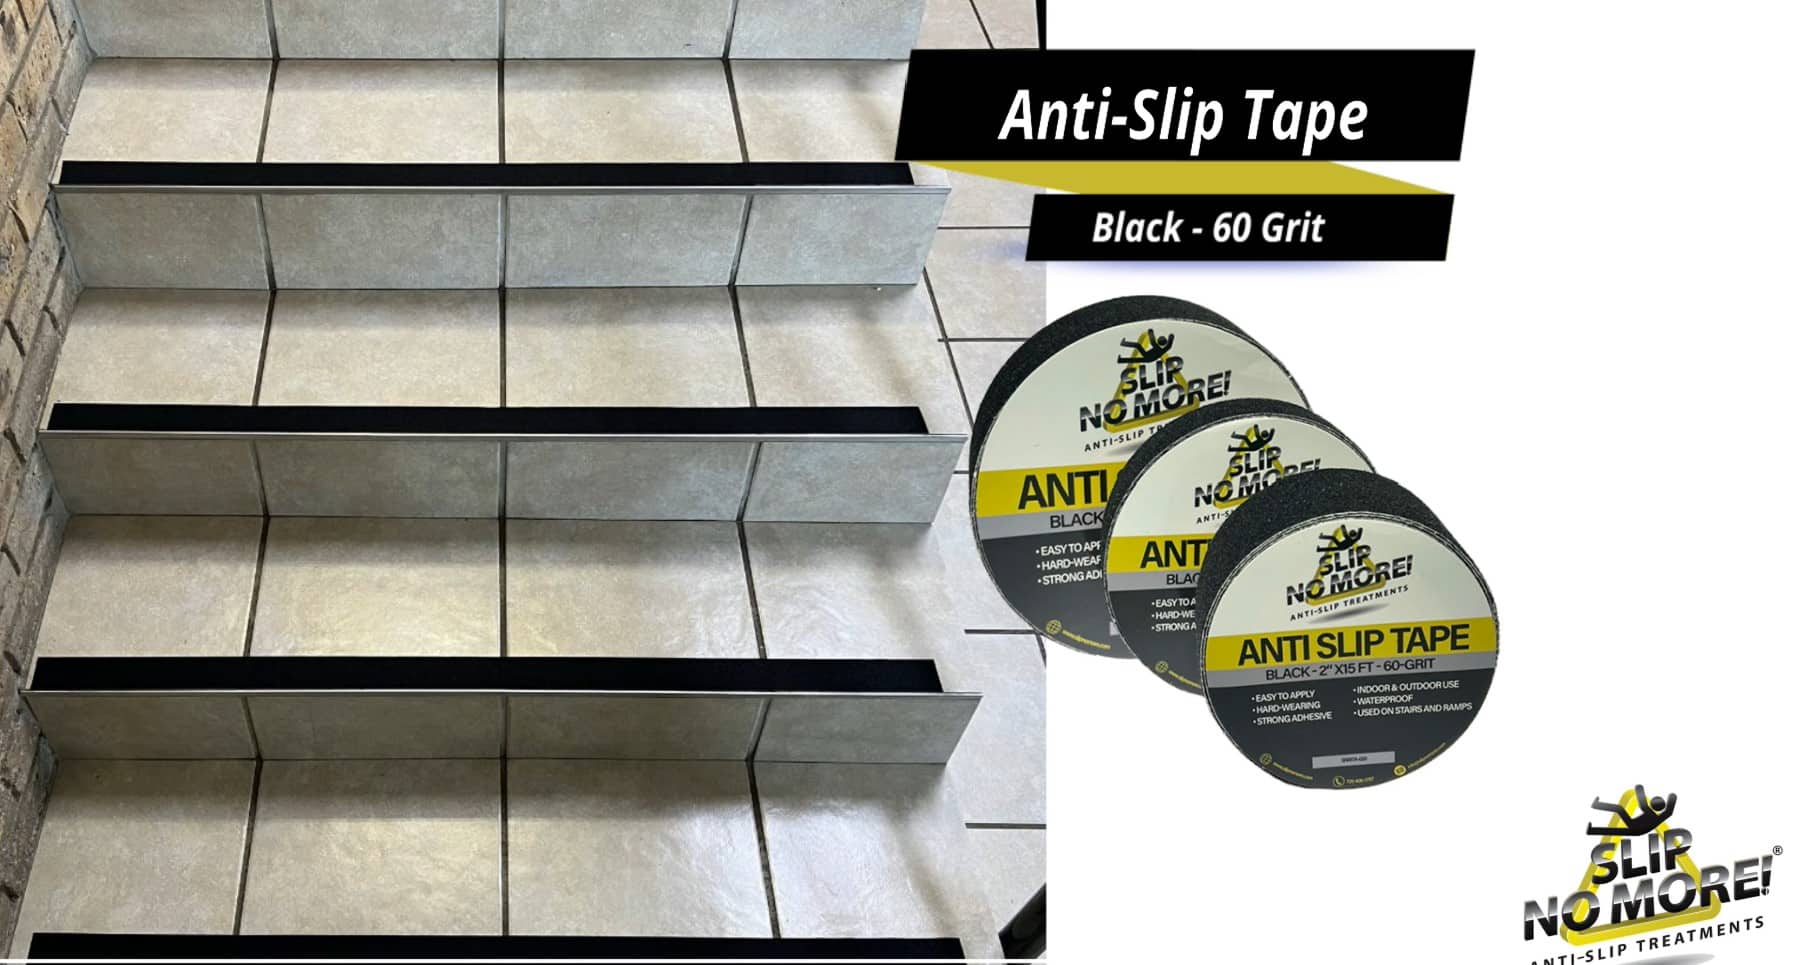 Anti-Slip Tape for Stairs-How to make your stairs safer